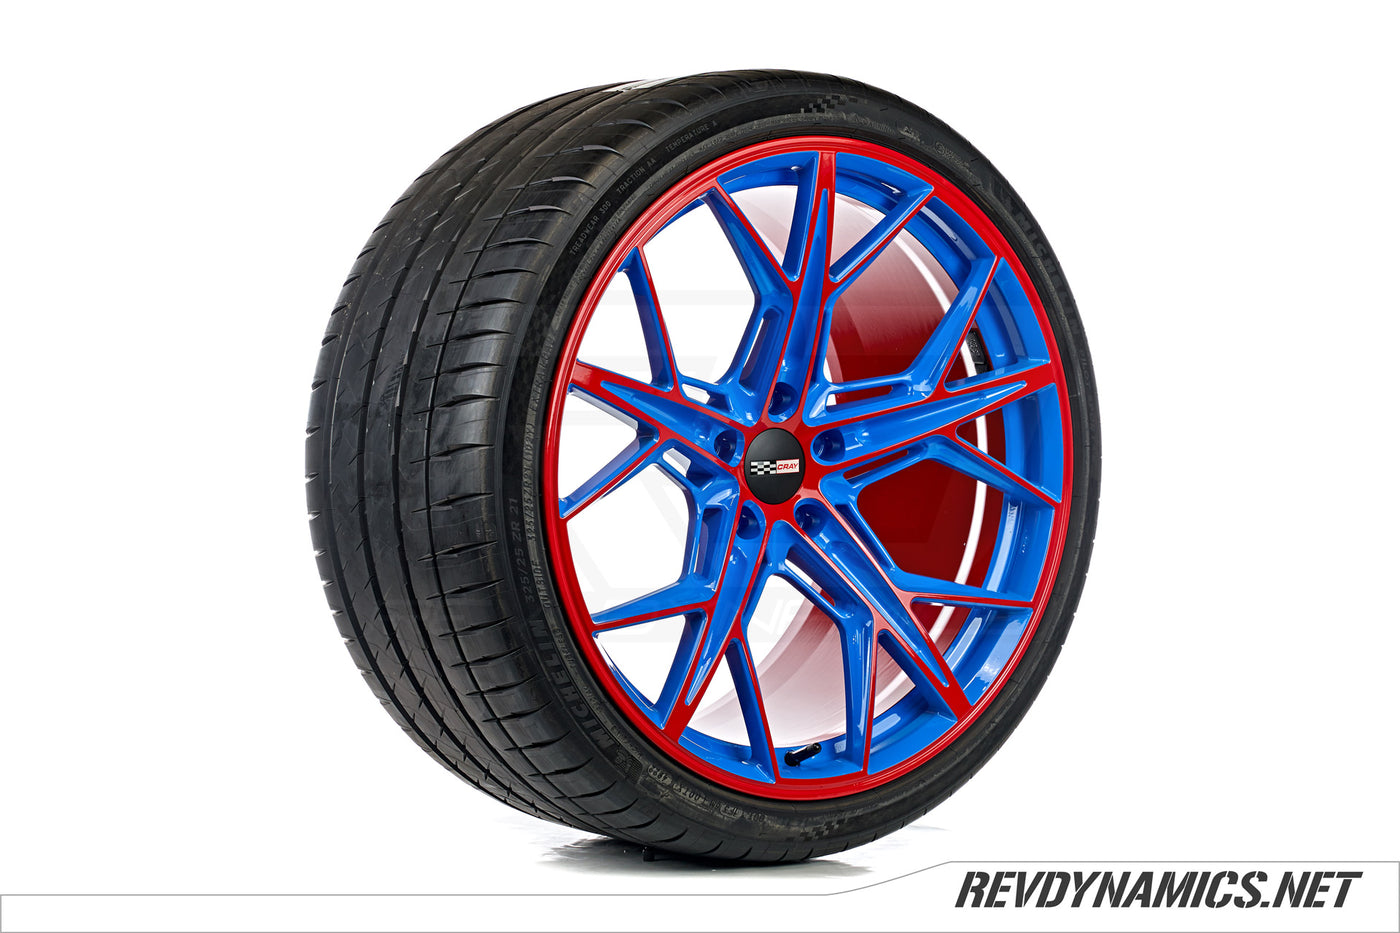 Cray Hammerhead 21" Rim Powdercoated Rapid Blue and Torch Red Corvette C8 colors 